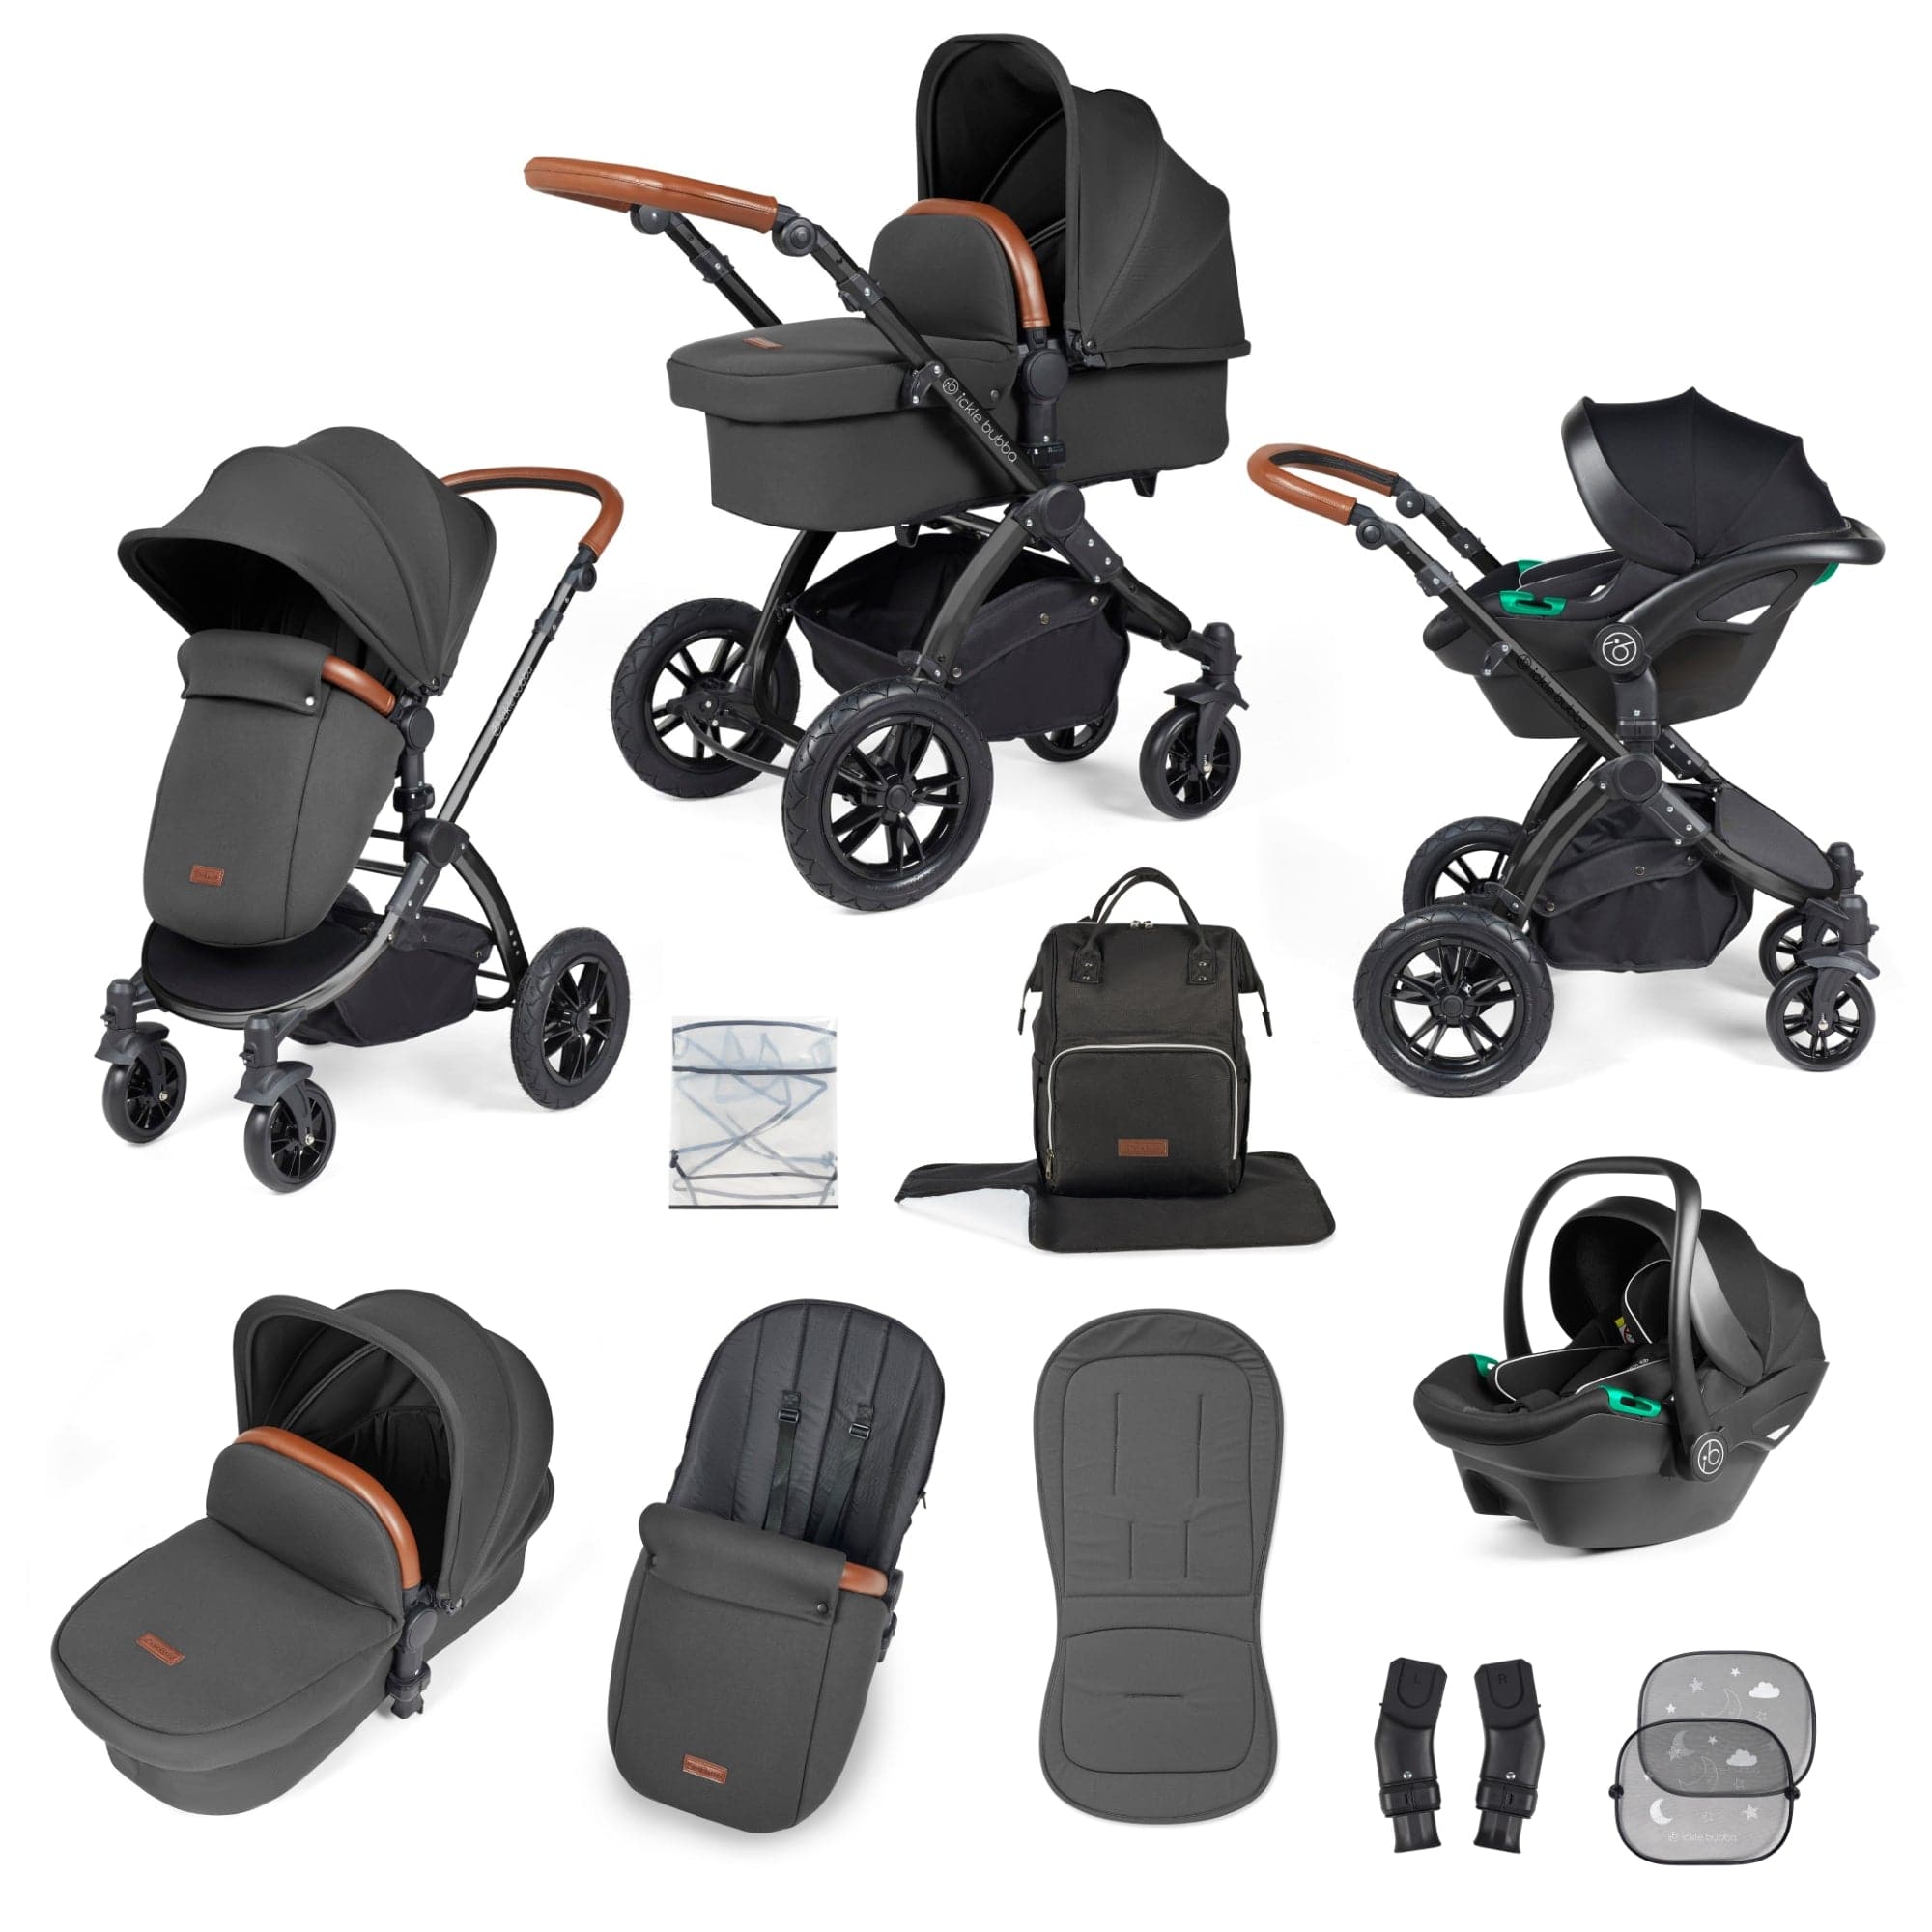 Ickle Bubba Stomp Luxe All-in-One I-Size Travel System With Isofix Base - Black / Charcoal Grey / Tan - For Your Little One